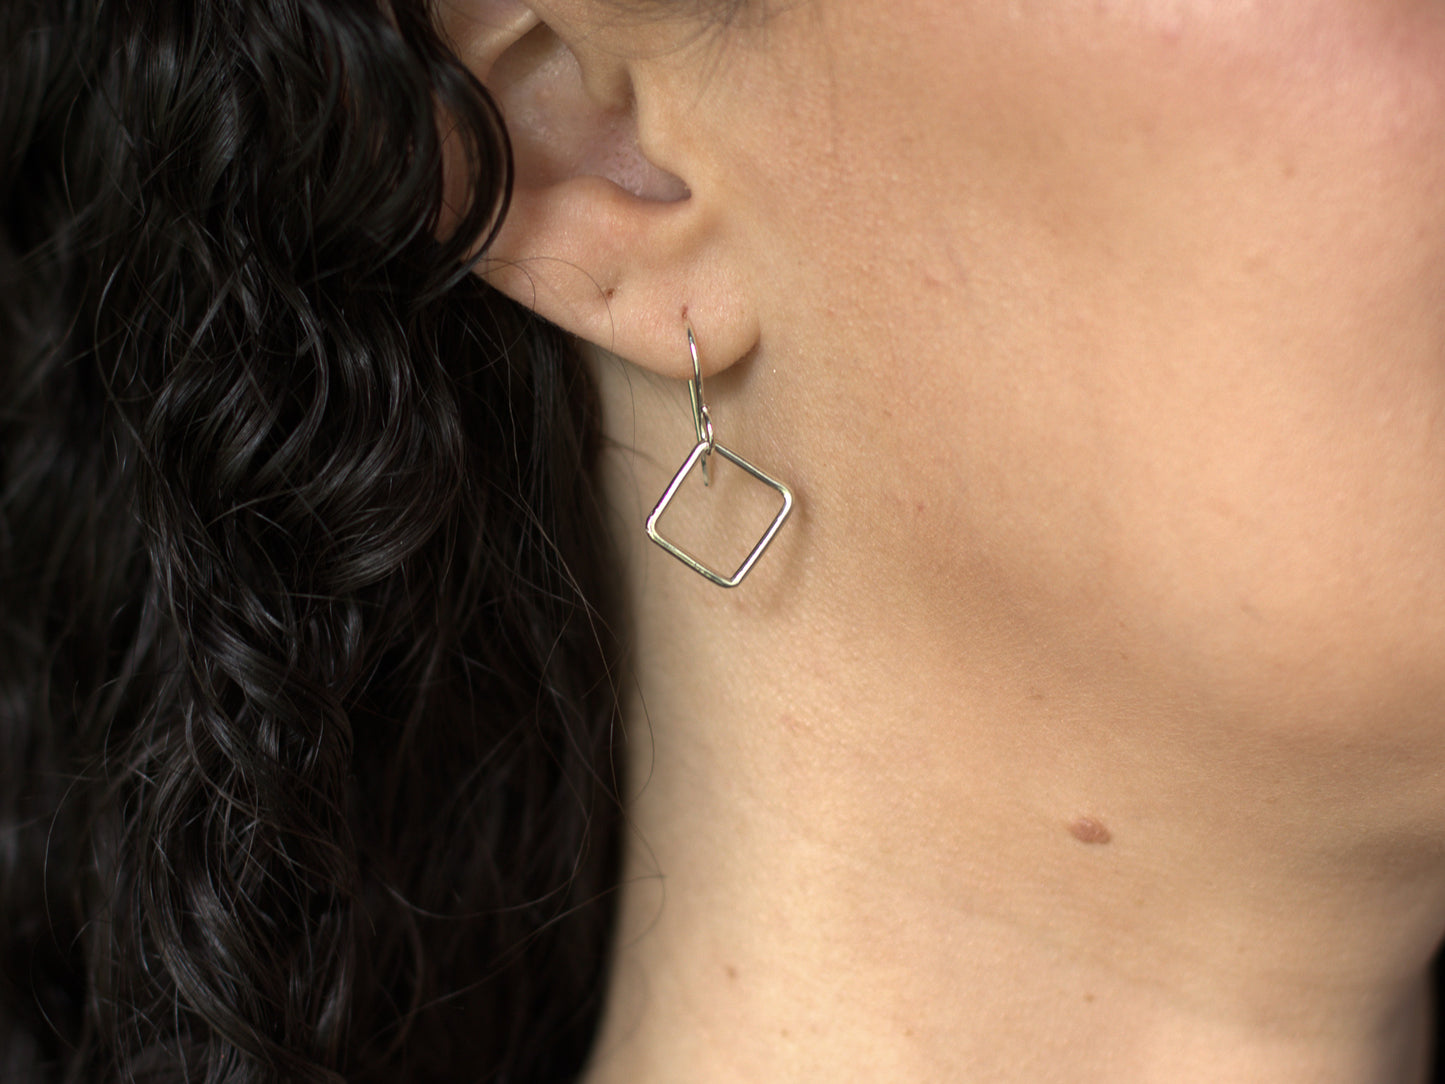 Practice Mindful Breathwork with our Box Breathing jewelry Earrings